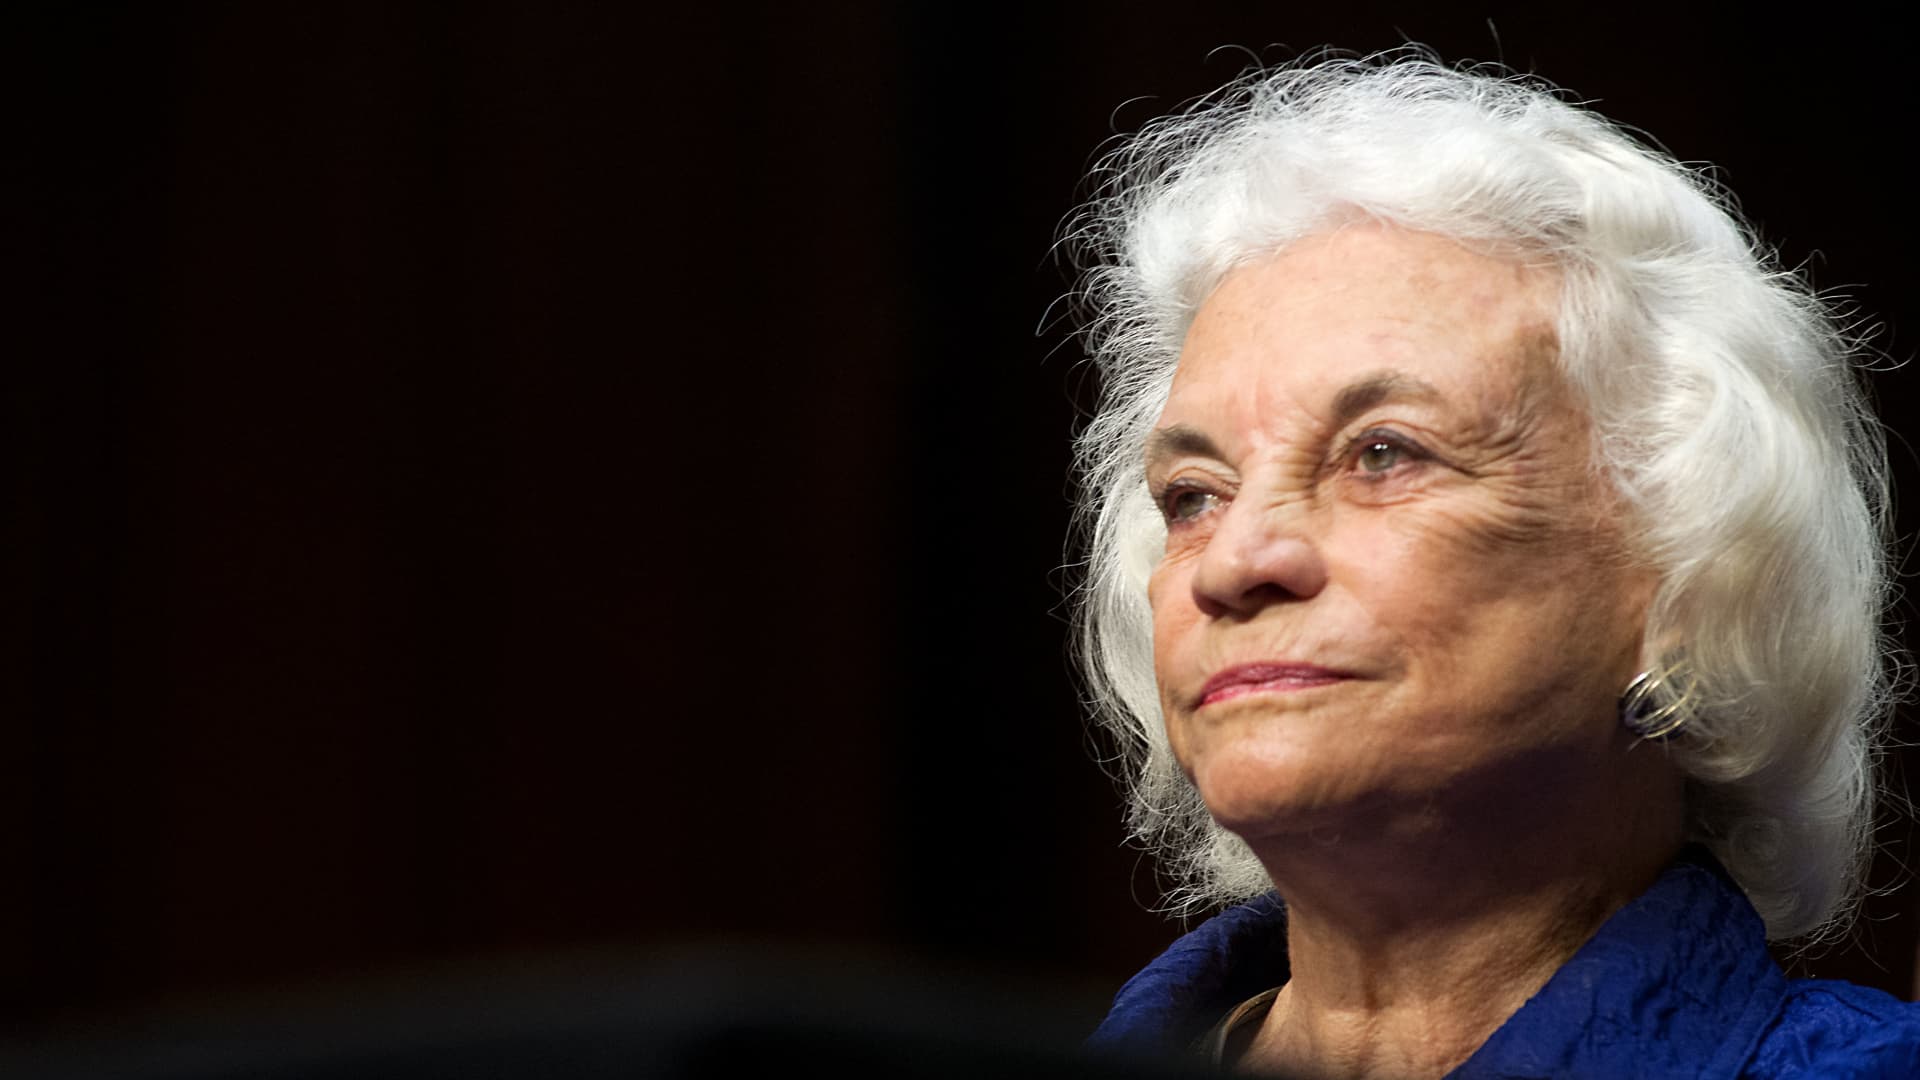 Sandra Day O'Connor's legacy on the bench includes deciding votes on affirmative action, abortion